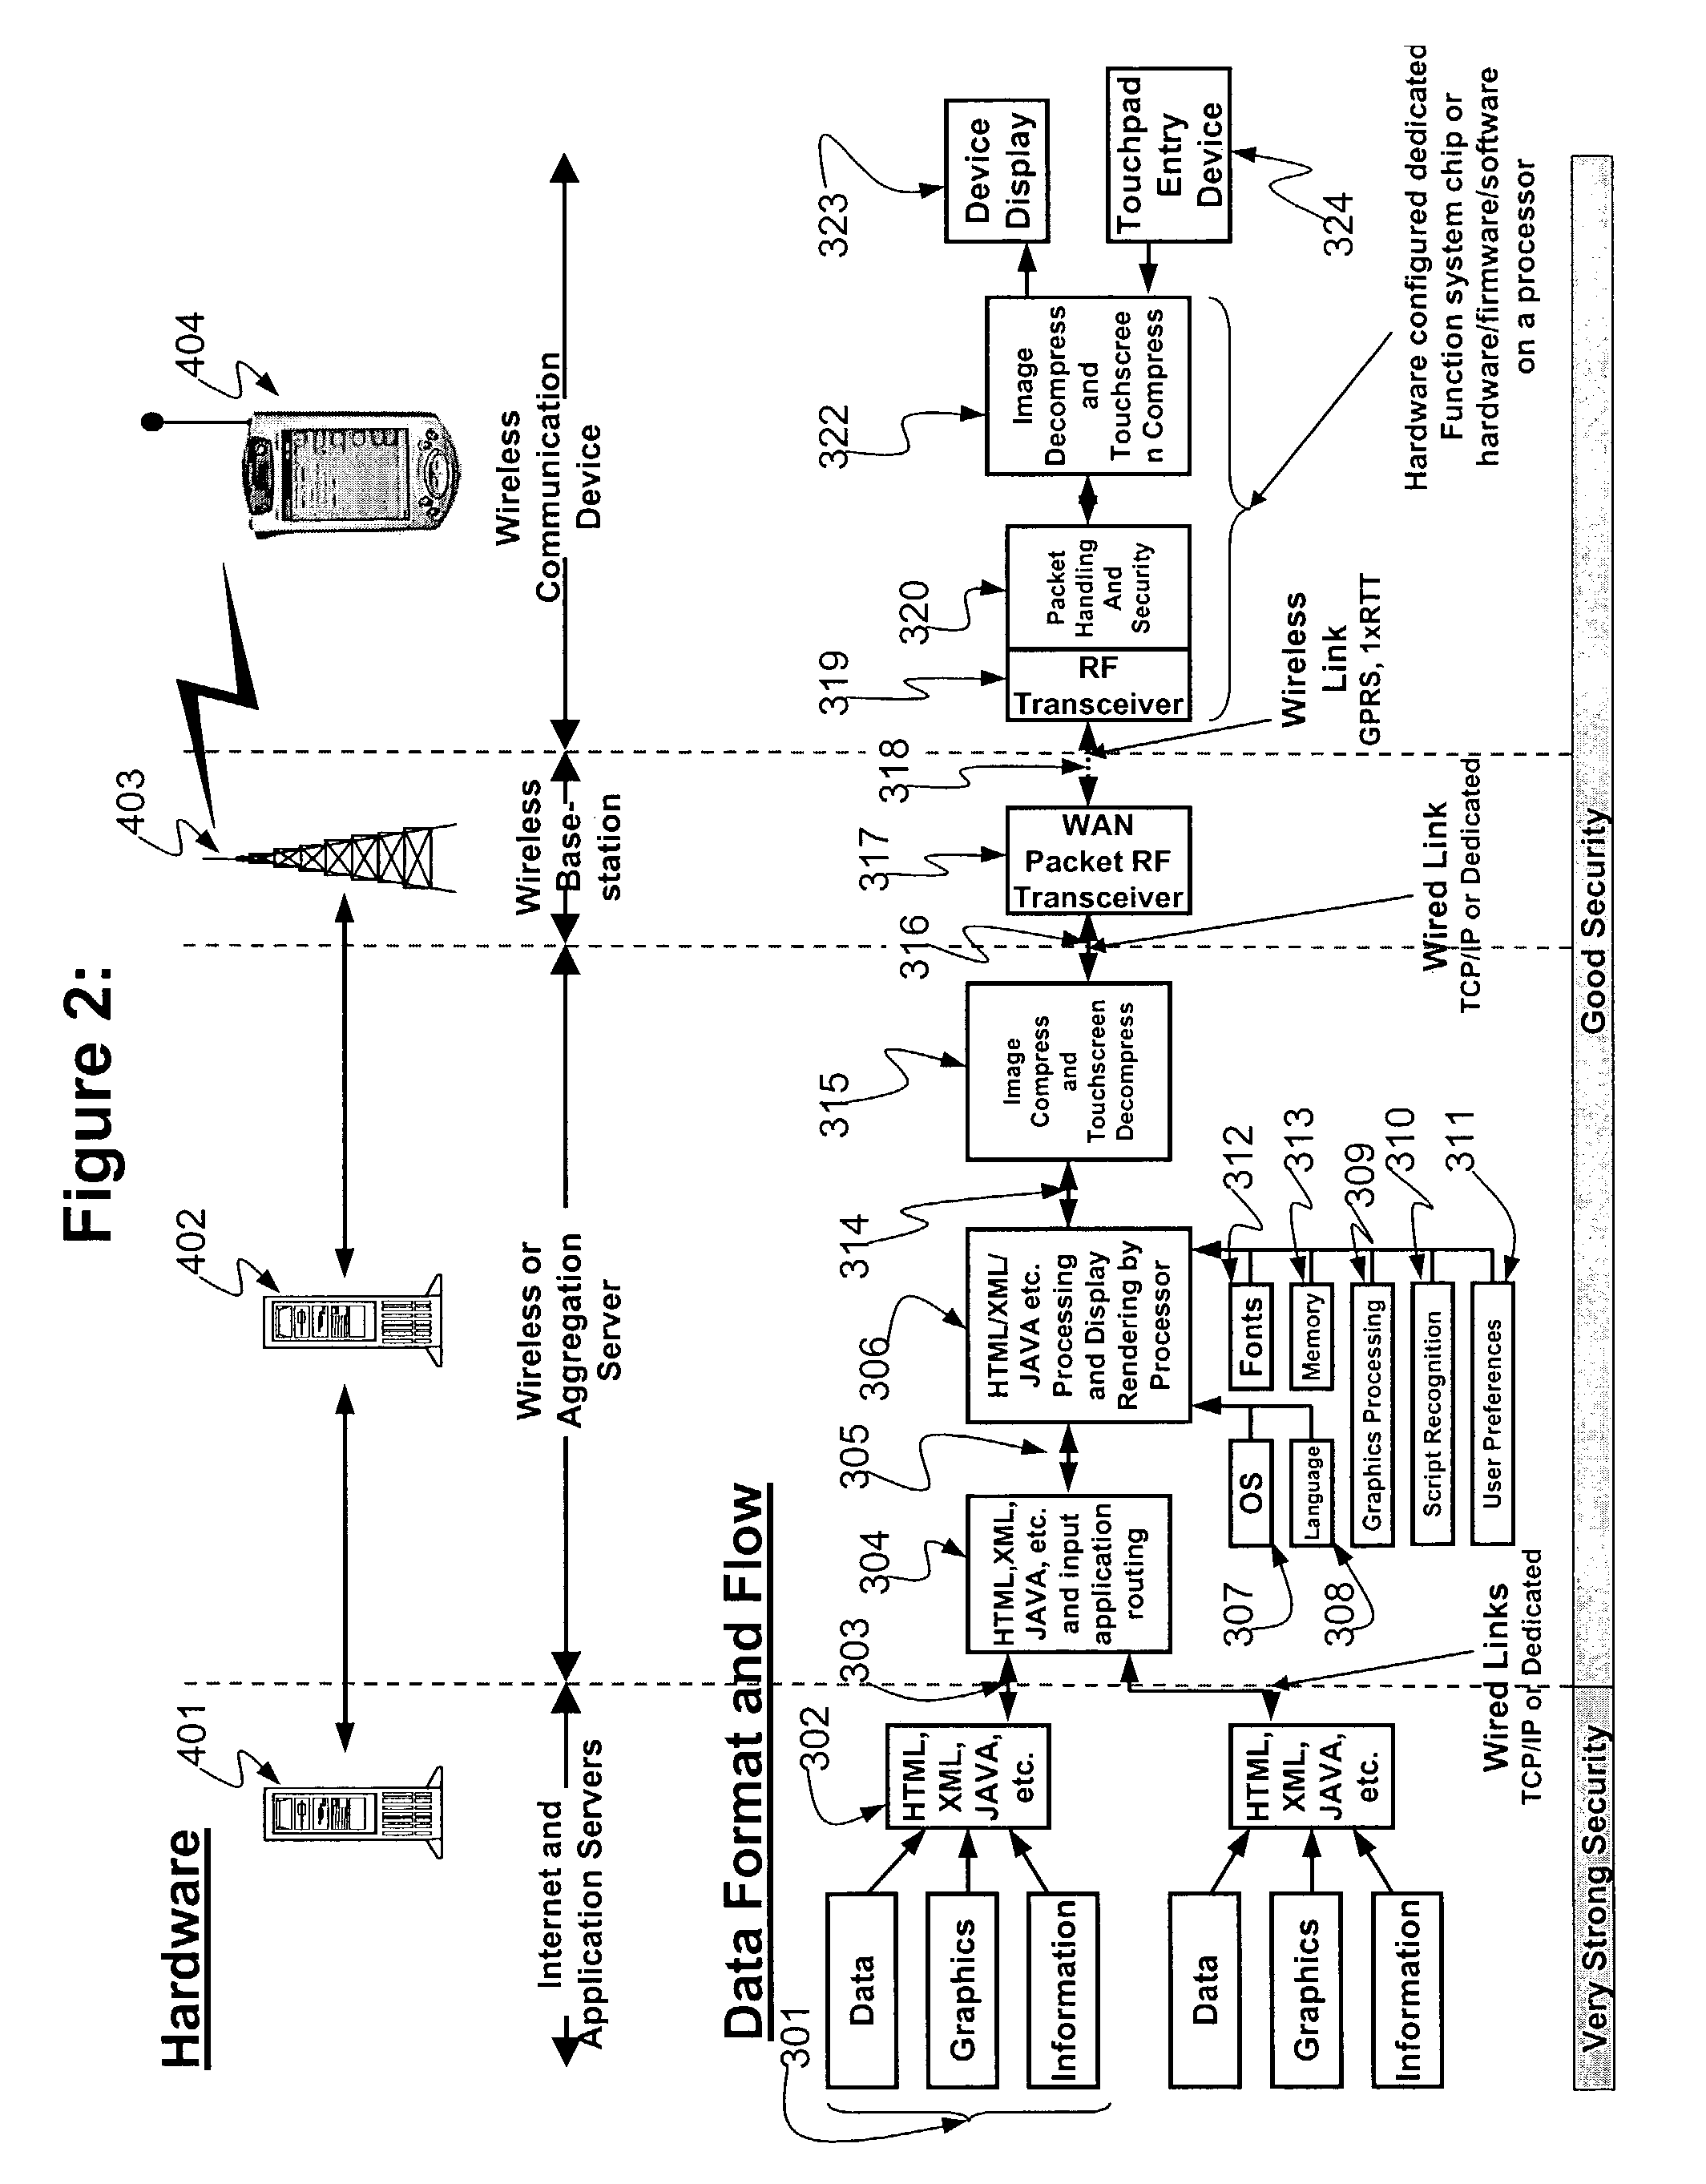 Wireless network architecture and method